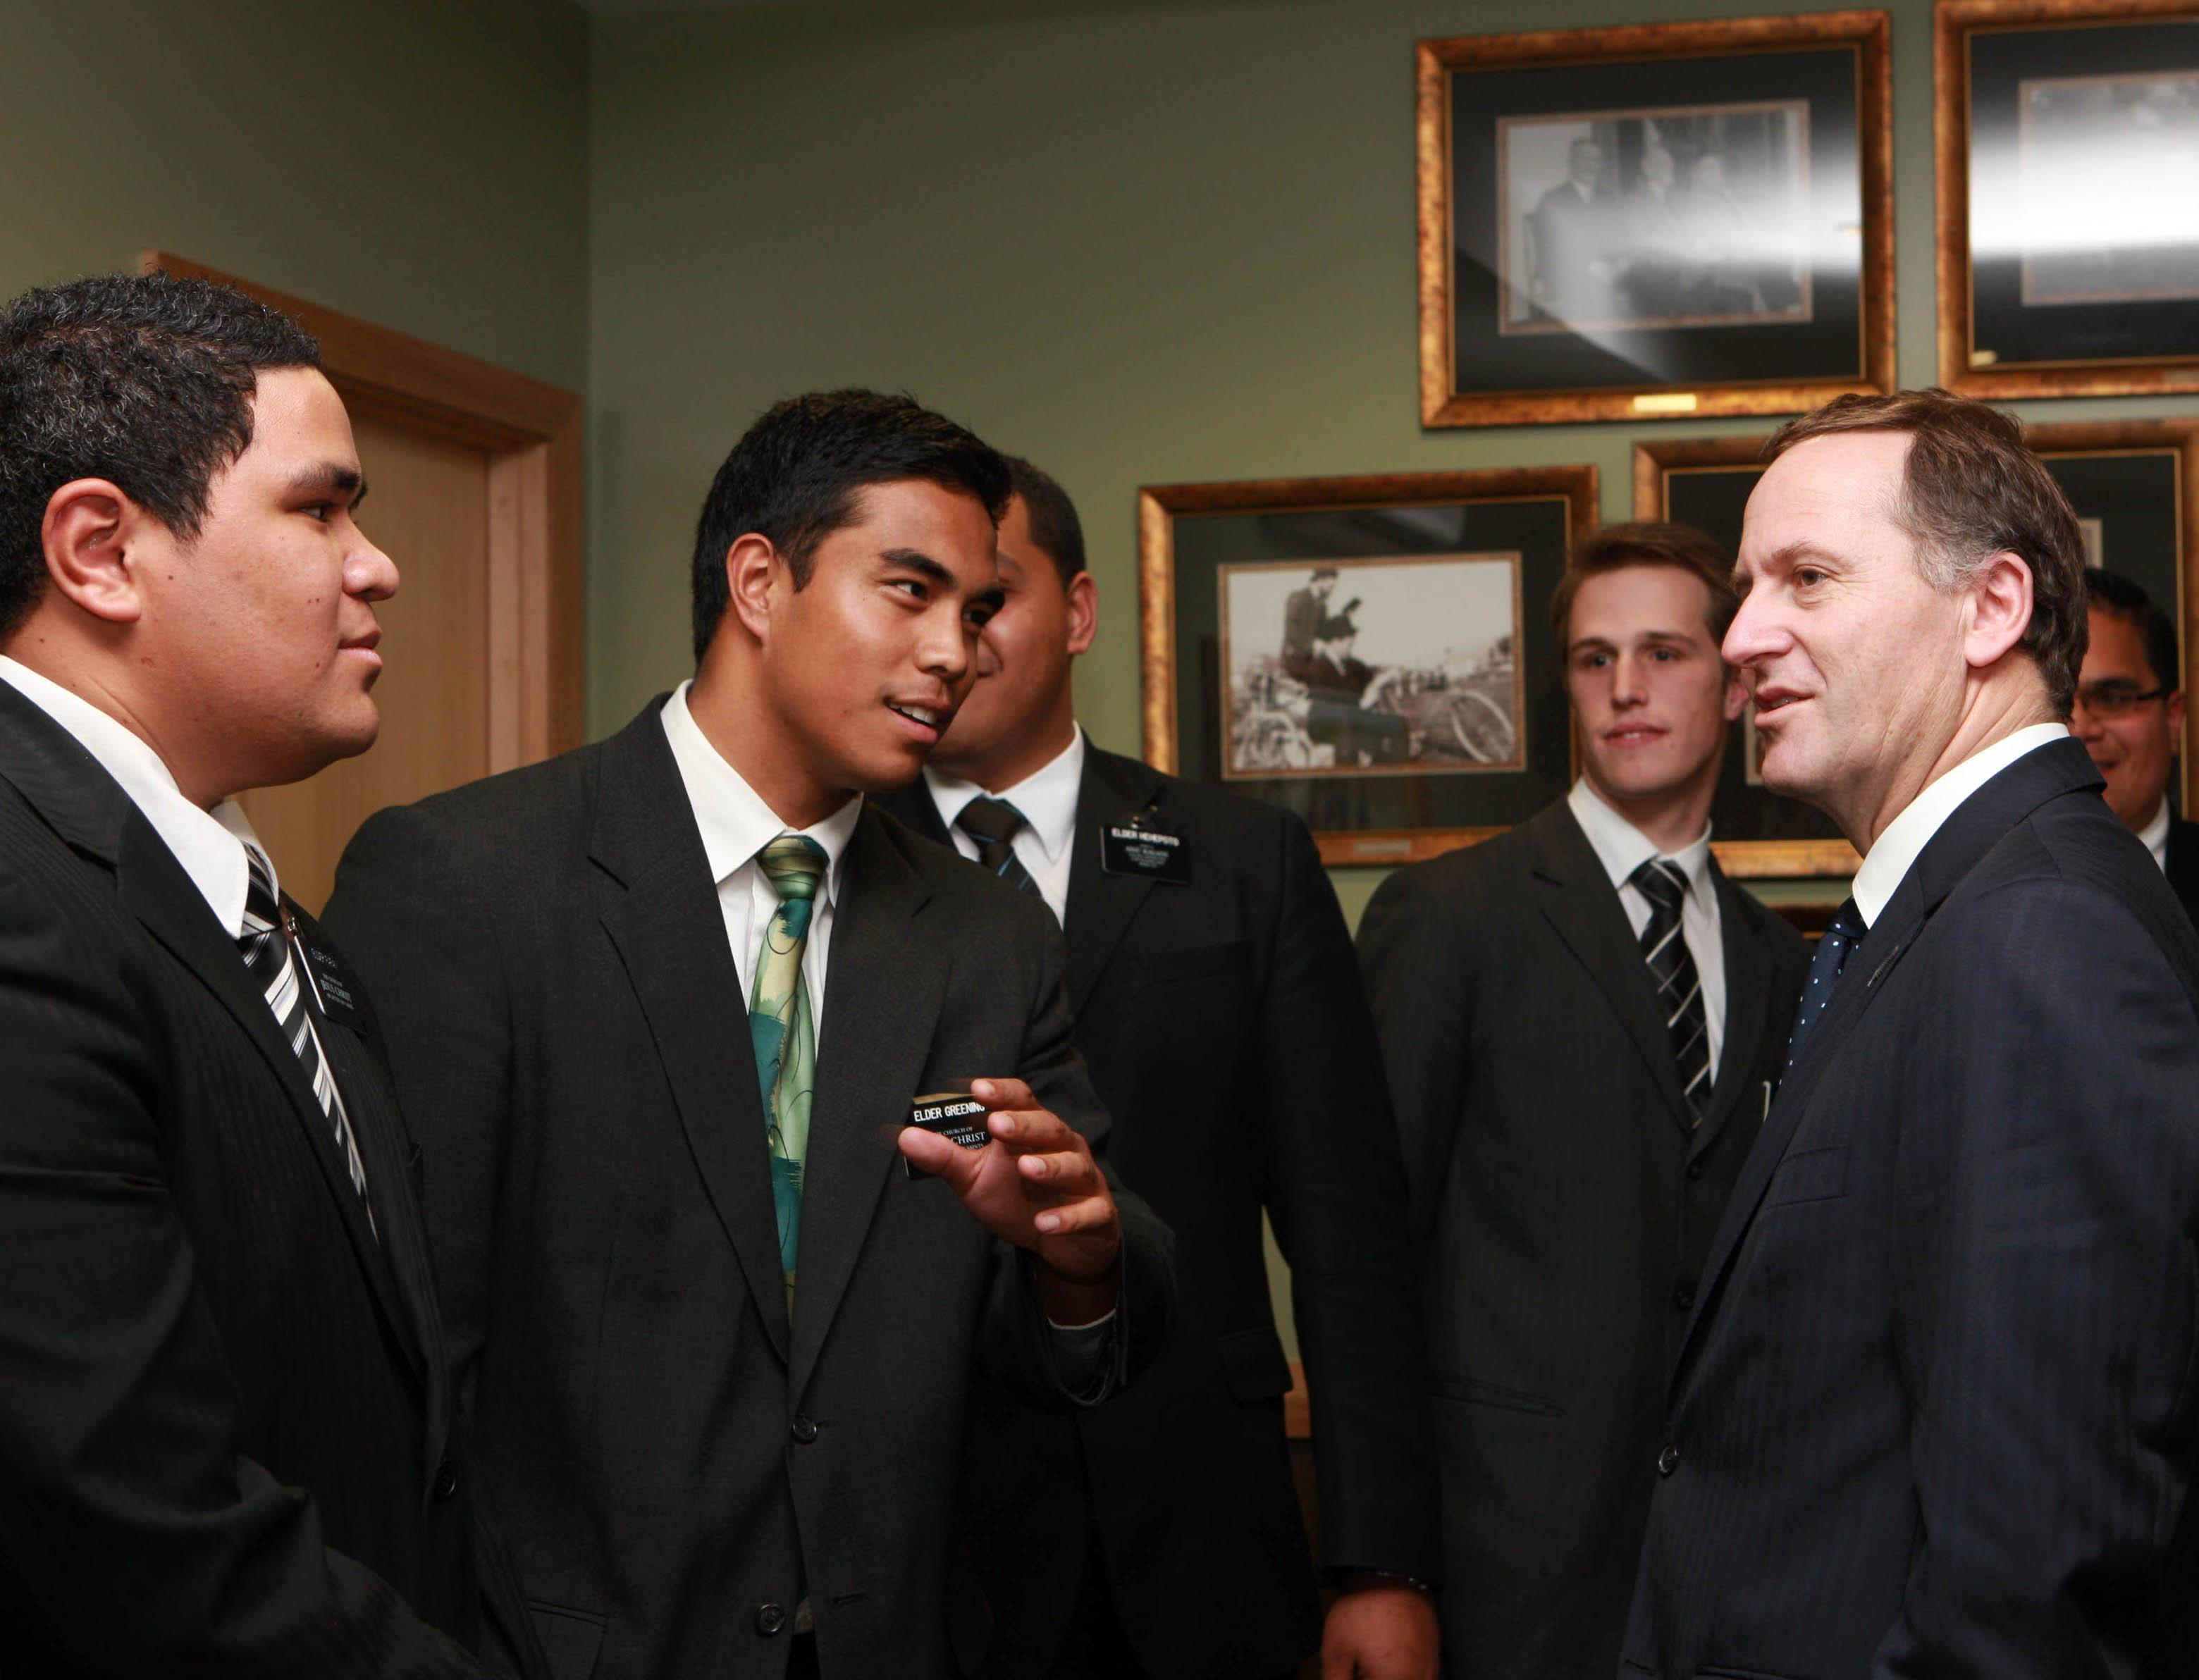 Mormon missionaries and Prime Minister of New Zealand